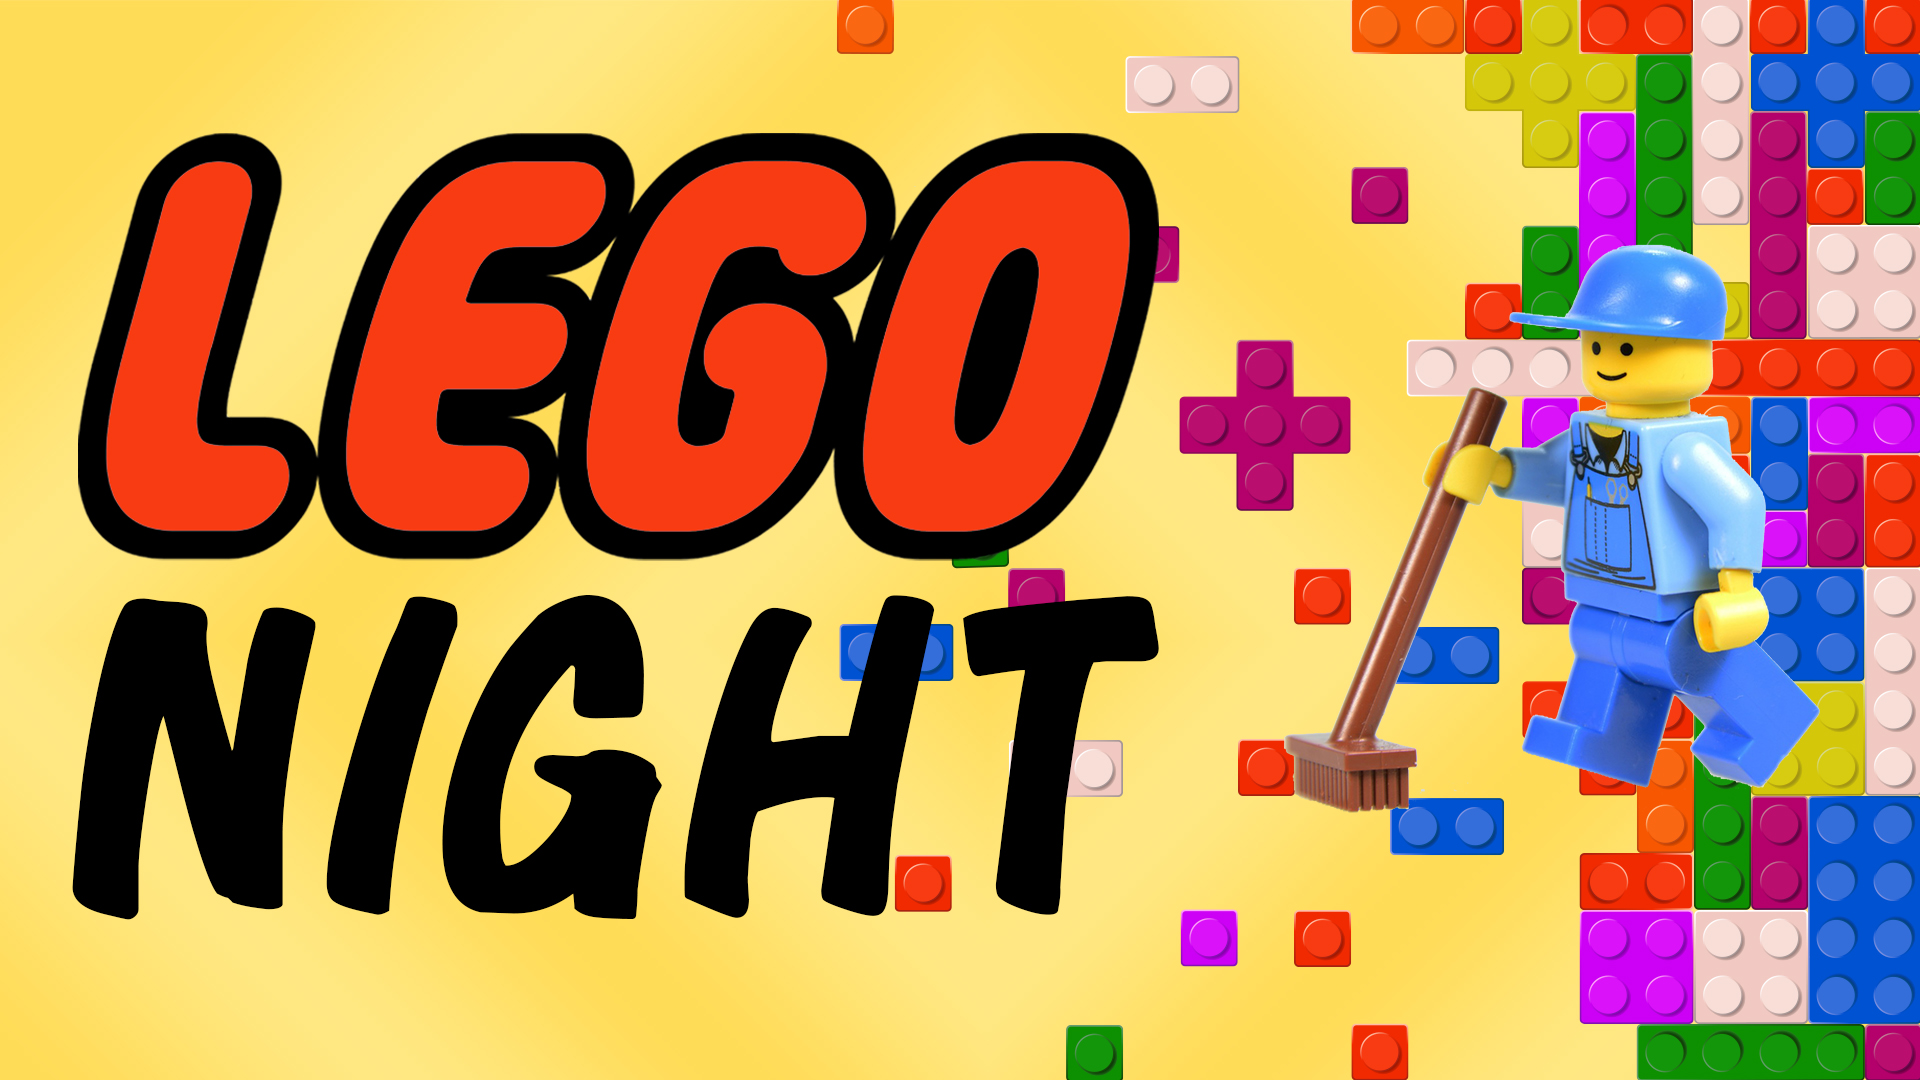 Image reads "LEGO Night" against a yellow background. LEGOs are to the right of the title and LEGO man is in front of the LEGOs. 